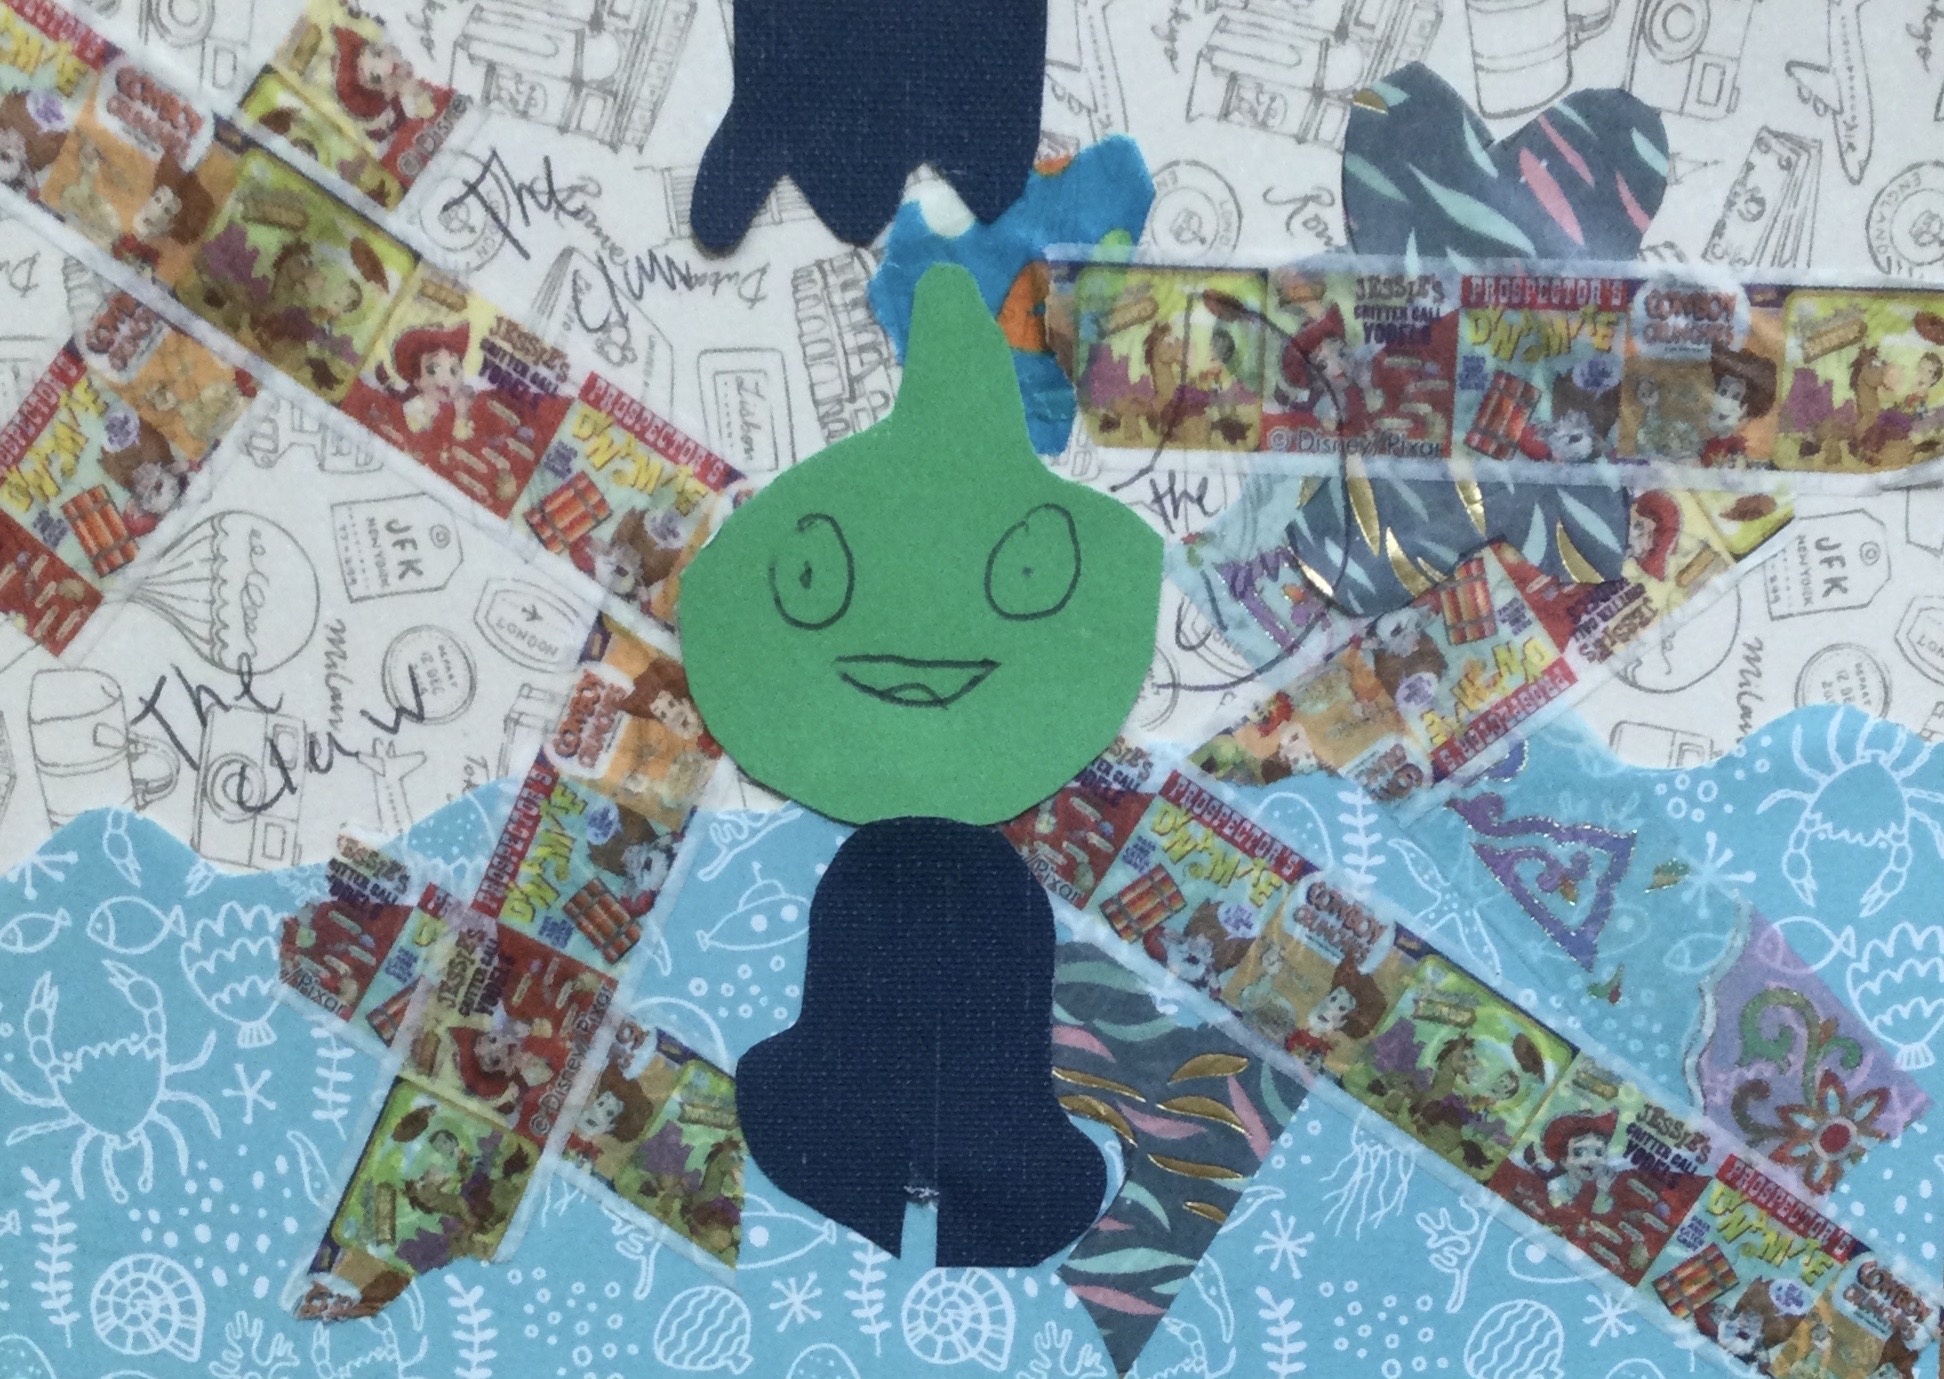 A collaged postcard with blue patterned paper overlaid with cartoon tape and a cut-out cartoon character